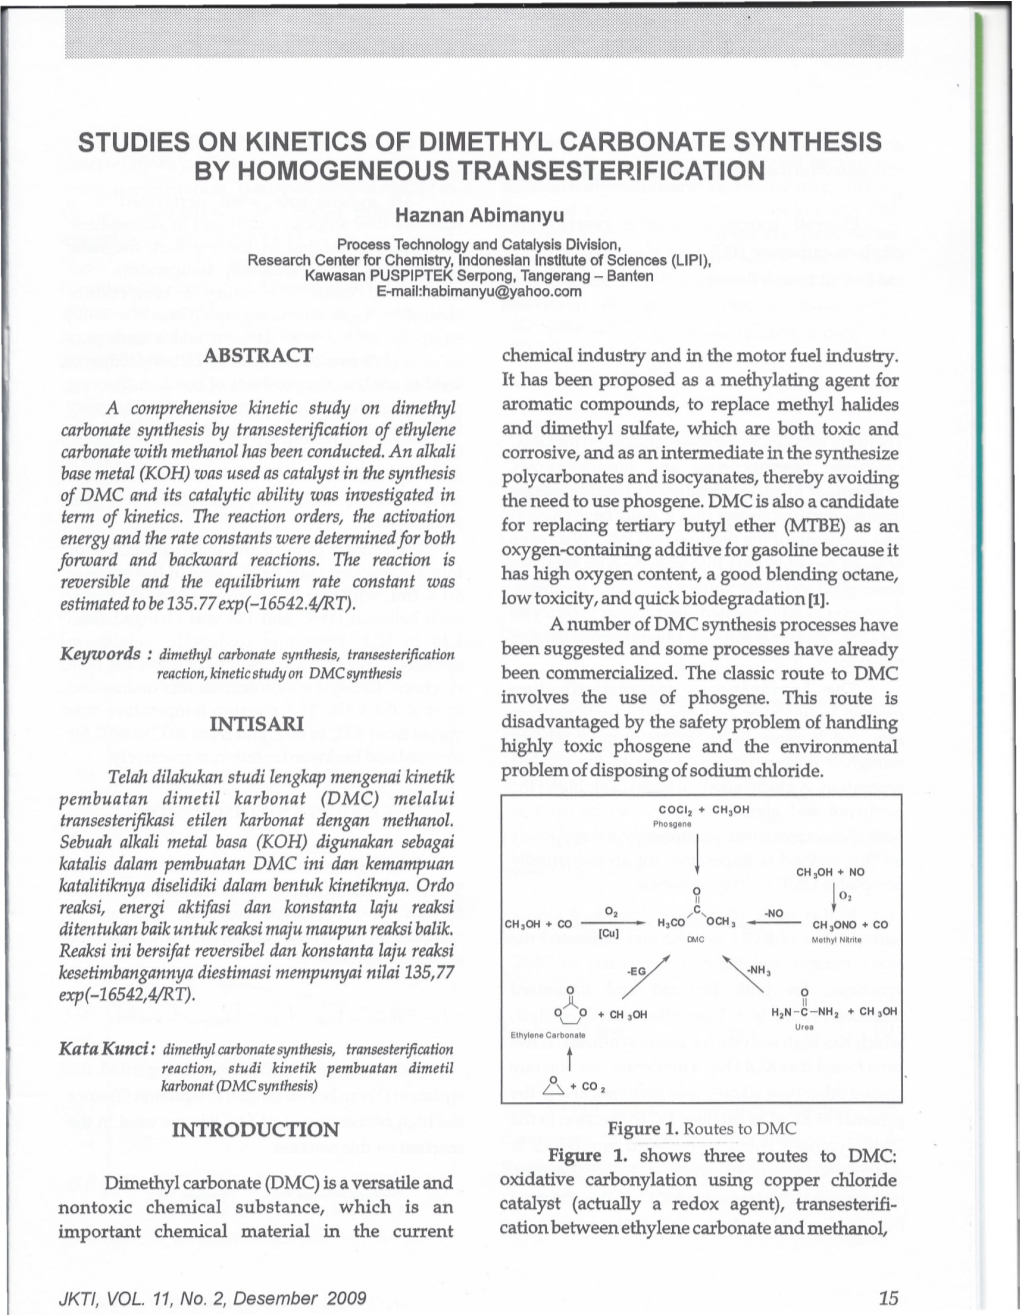 Studies on Kinetics of Dimethyl Carbonate Synthesis by Homogeneous Transesterification